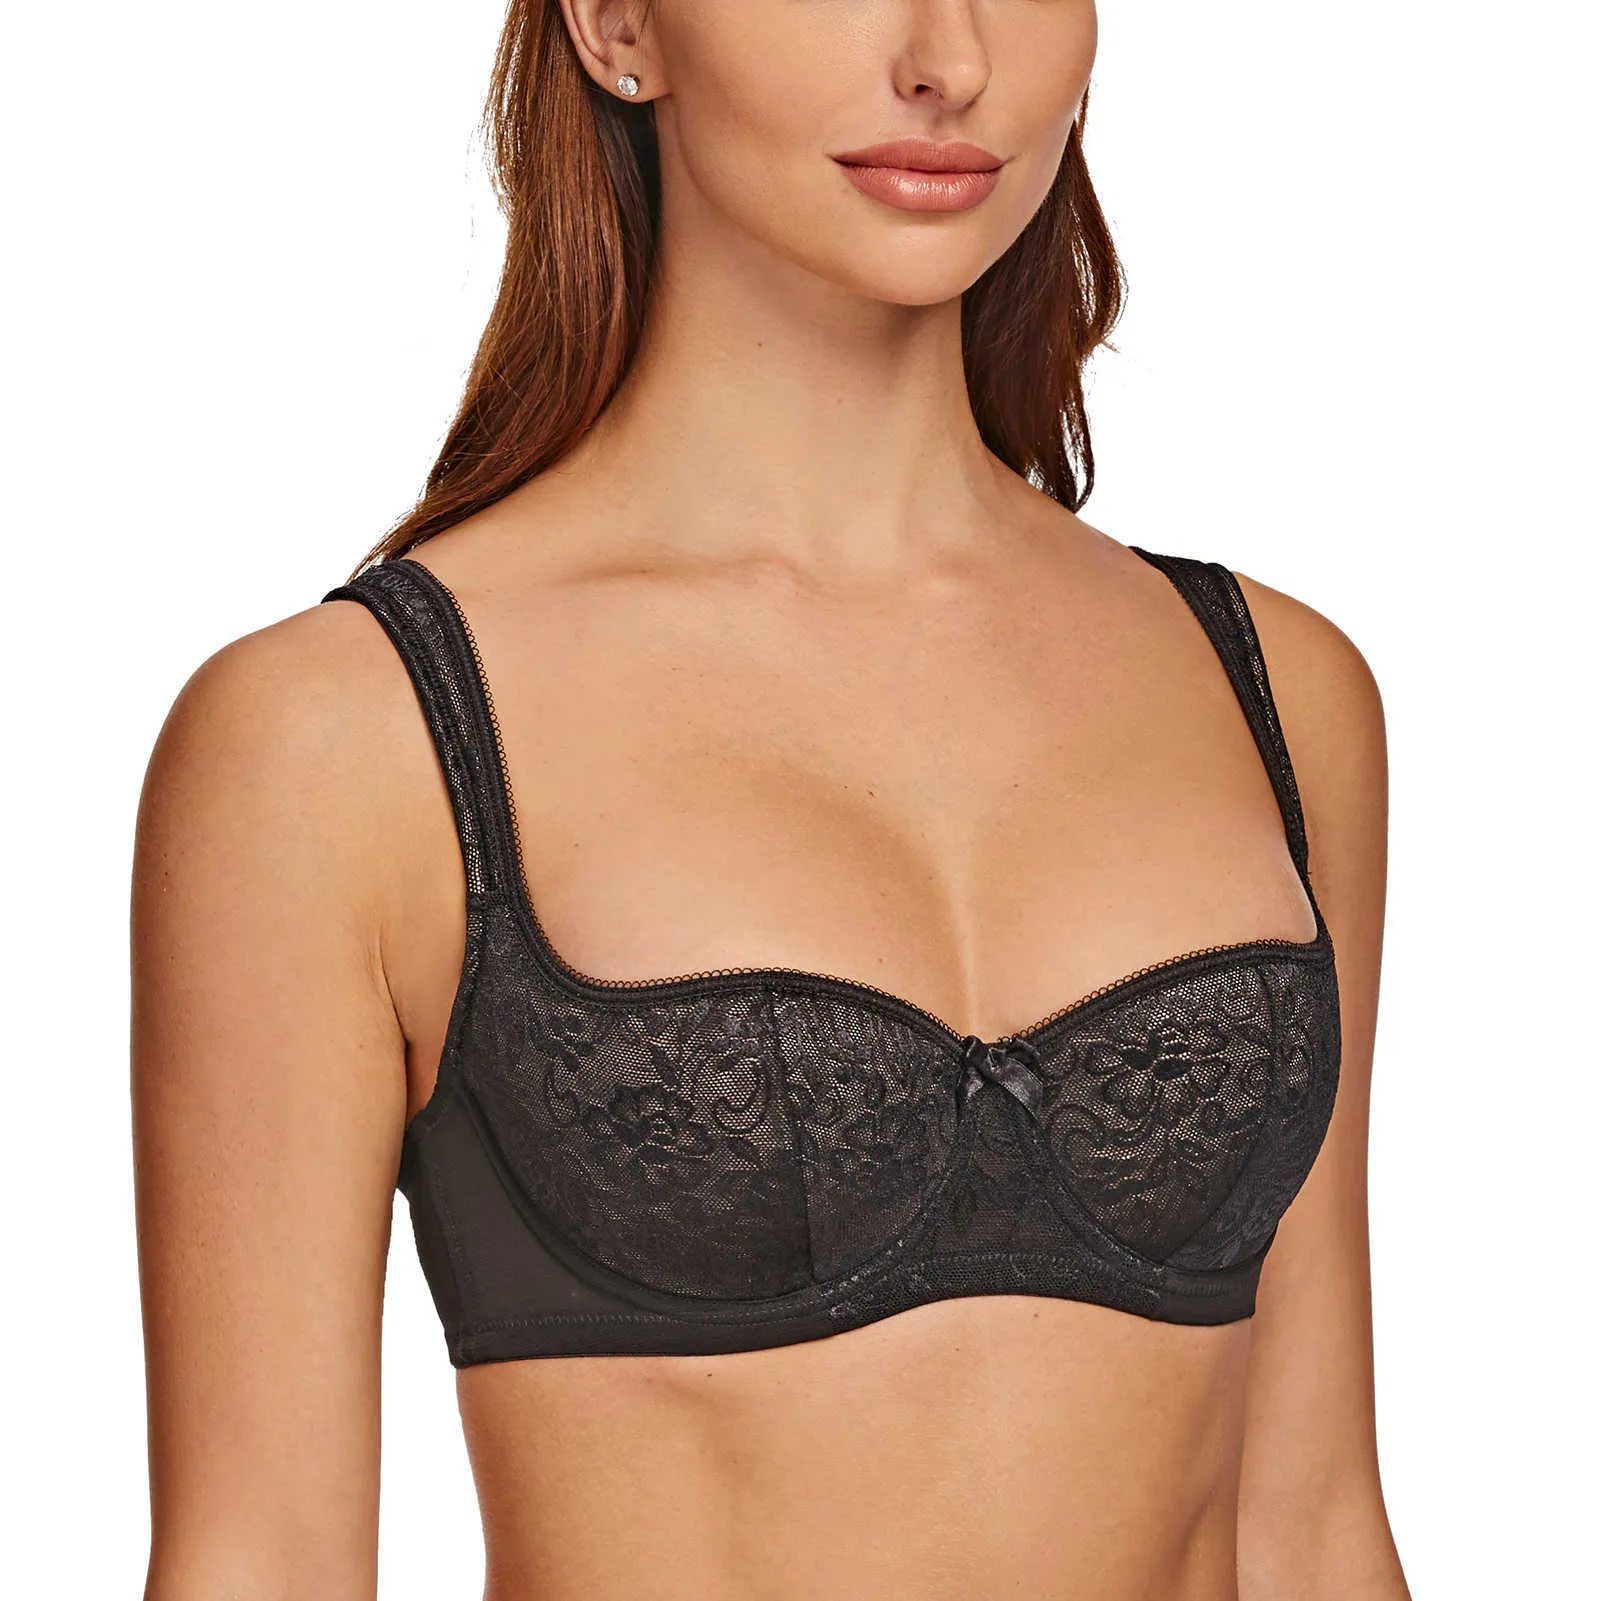 MELENECA Womens Lace Balconette Lace Push Up Bra With Padded Strap